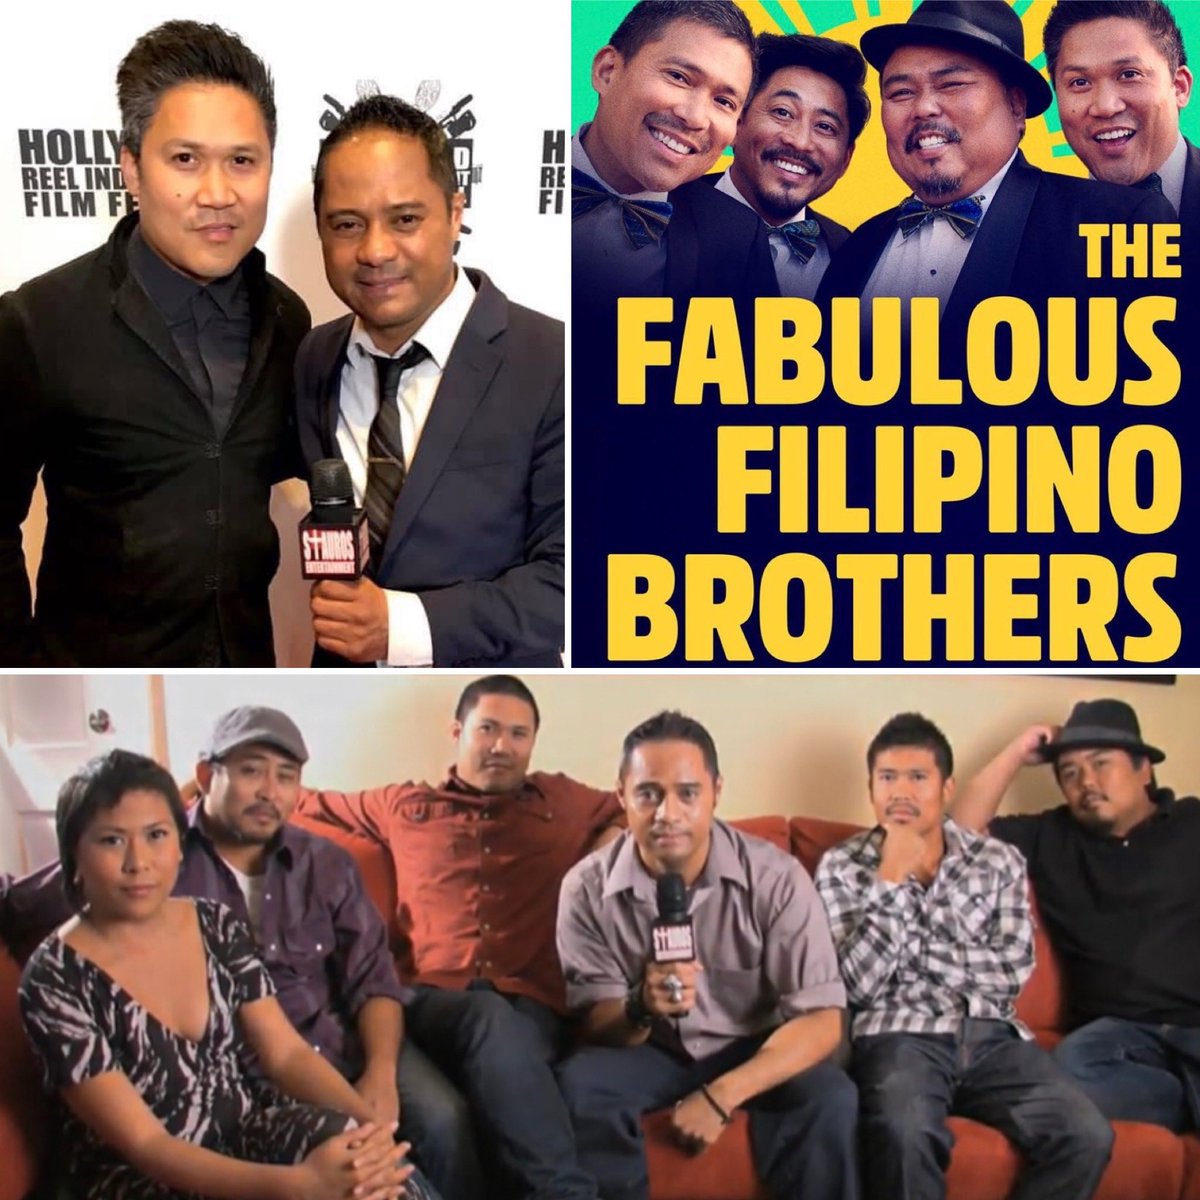 Wanted2HelpPromote & Dedicate this #TossbackTuesday Memory to the Awesome #BascoFamily, a Group of #LongtimeDear Friends, who ALL have Written & Star in, the New Movie; #TheFabulousFilipinoBrothers, Directed by @dantebasco, that Releases2DAY on #Apple, #Amazon & More! CheckItOut!